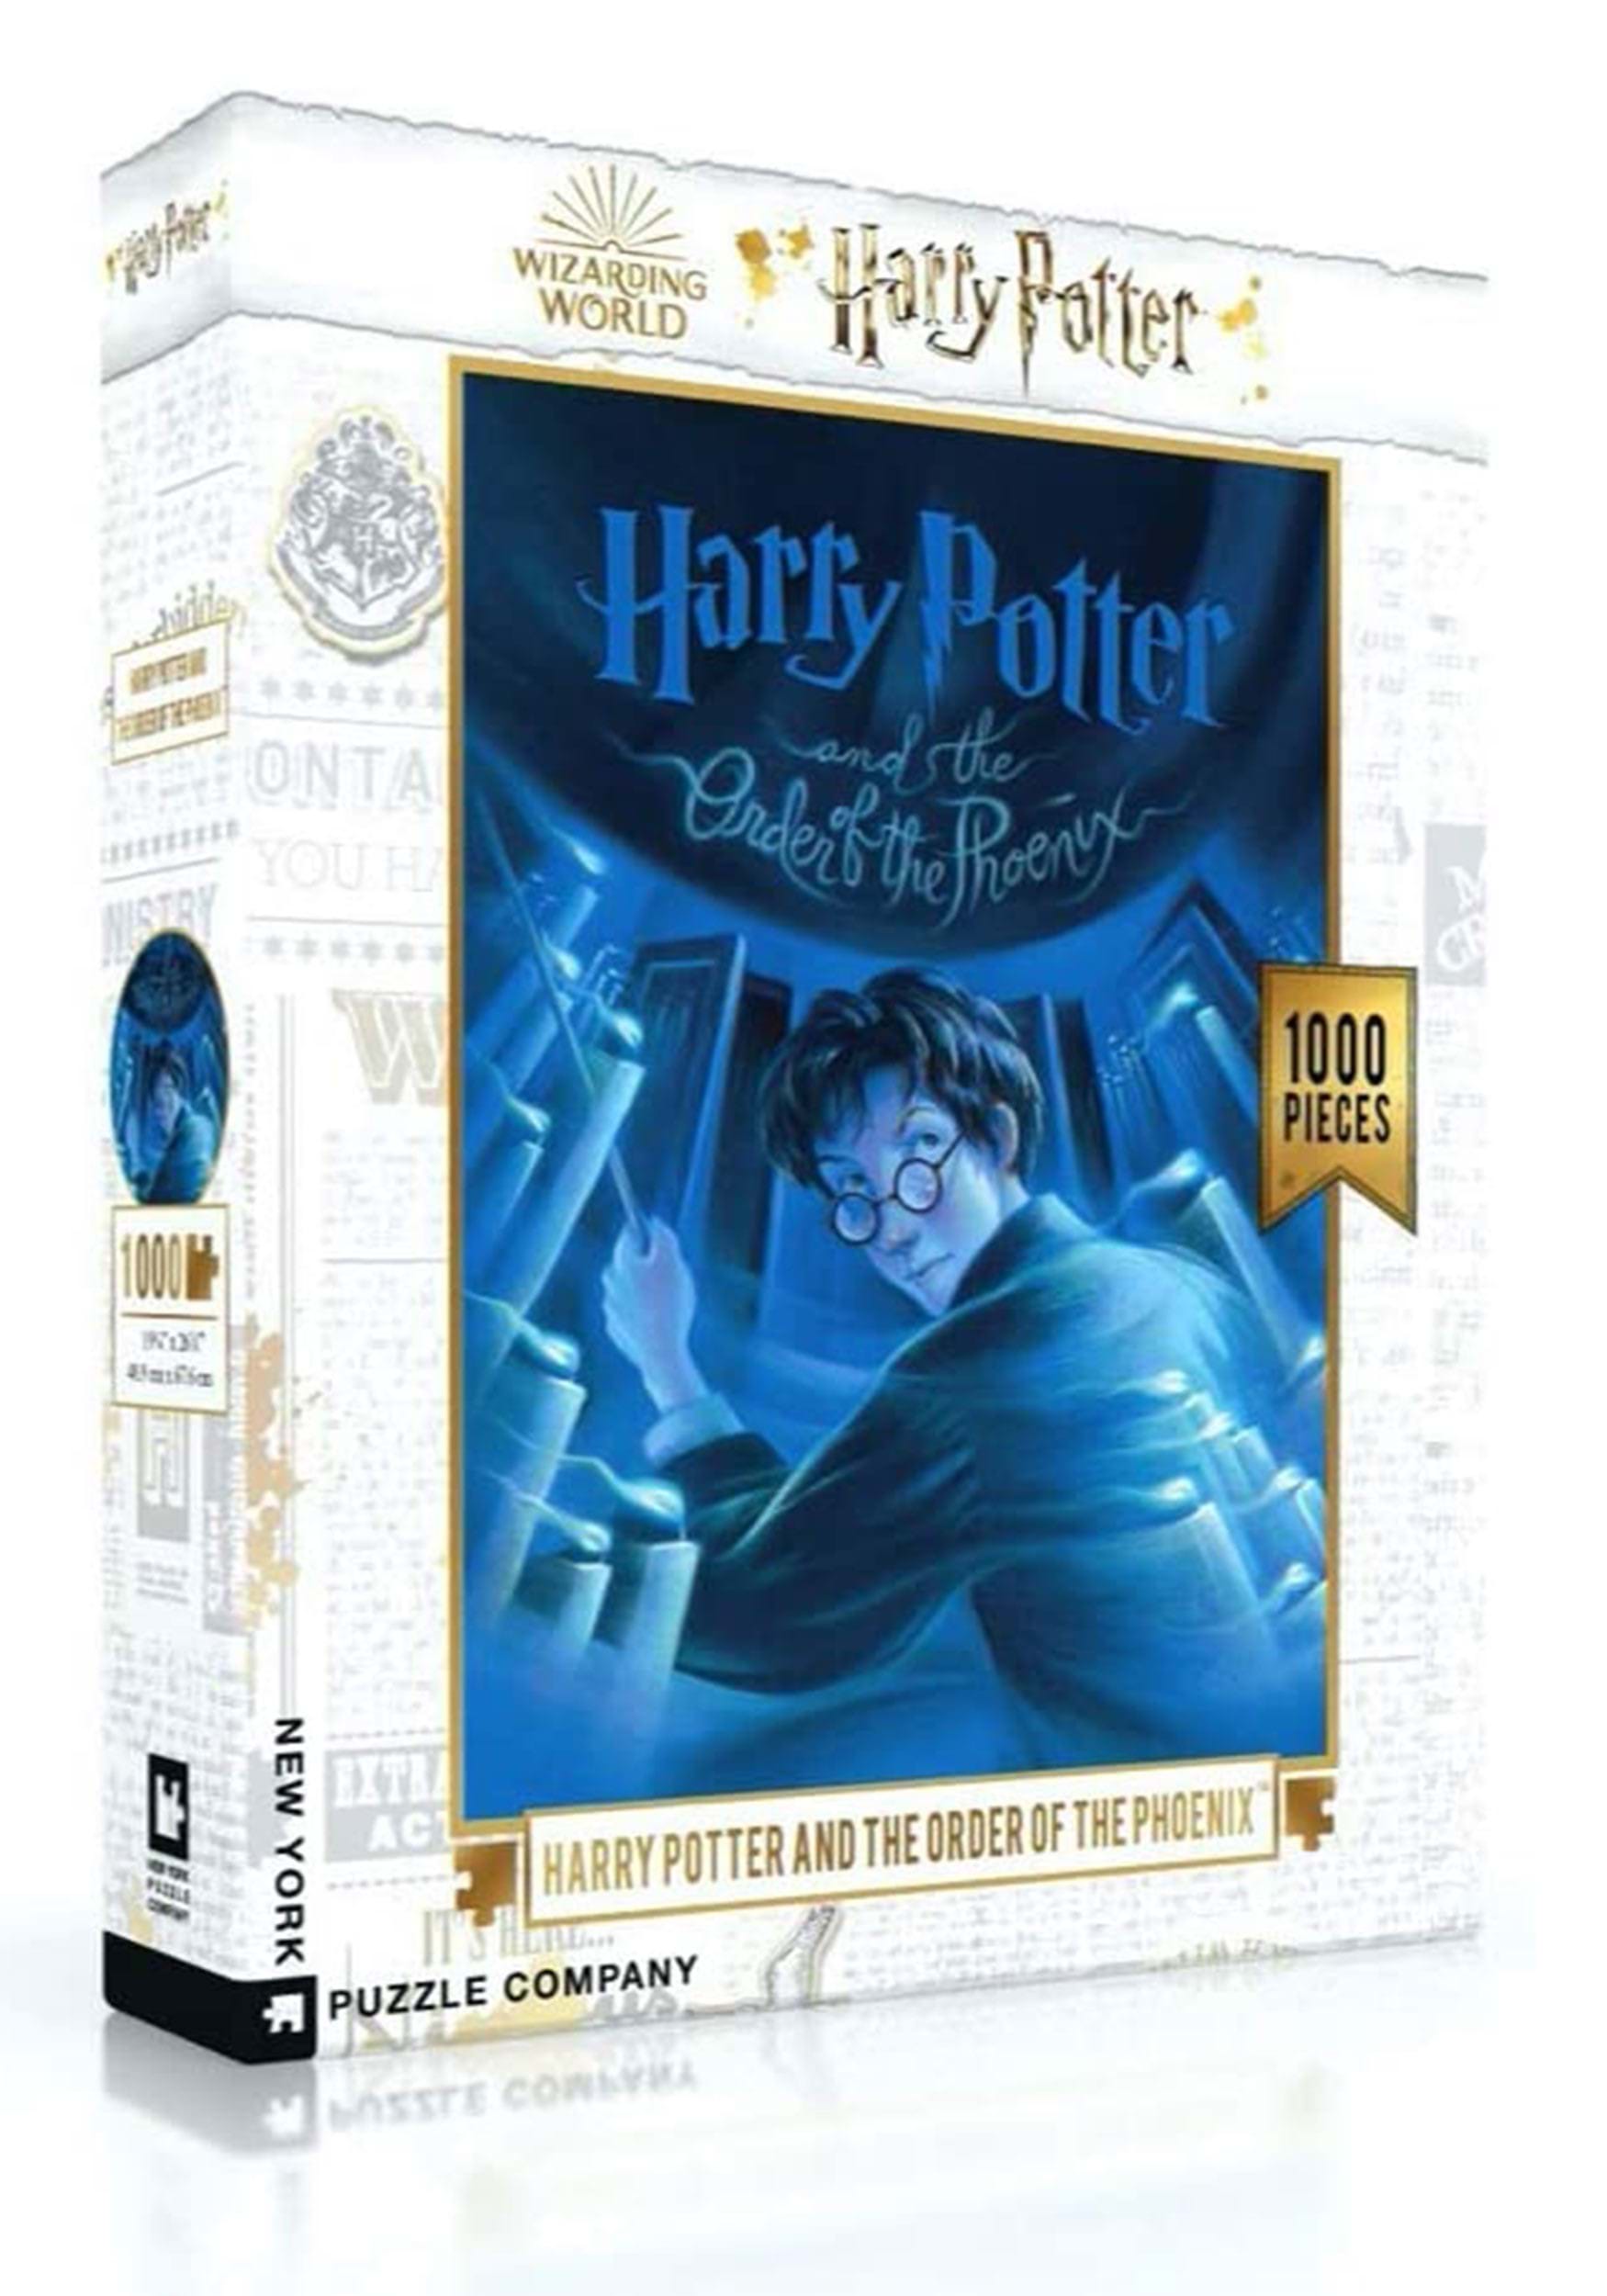 1000 pc Harry Potter and the Order of the Phoenix Jigsaw Puzzle